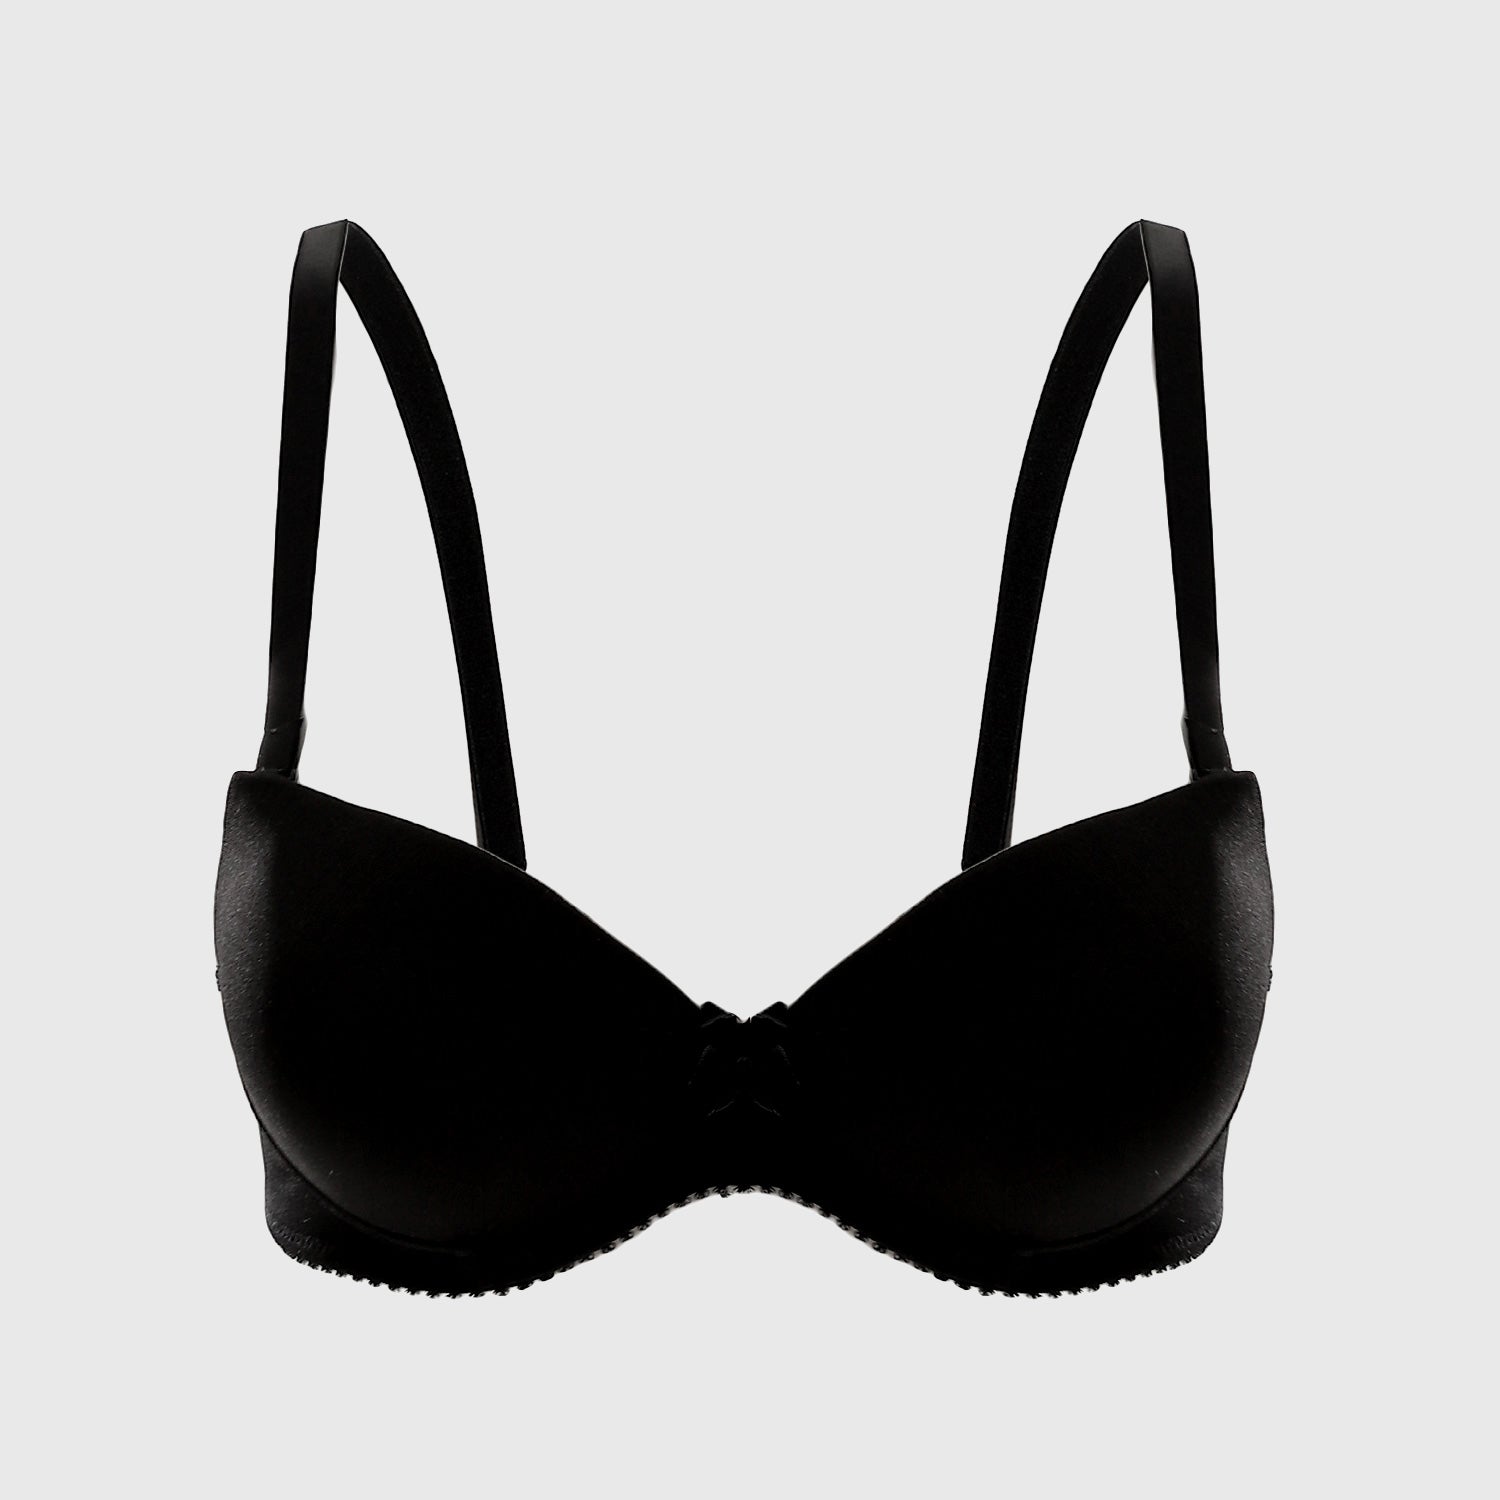 Buy Kokal Black Cotton Push-Up Bra,Size-34 Online In India At